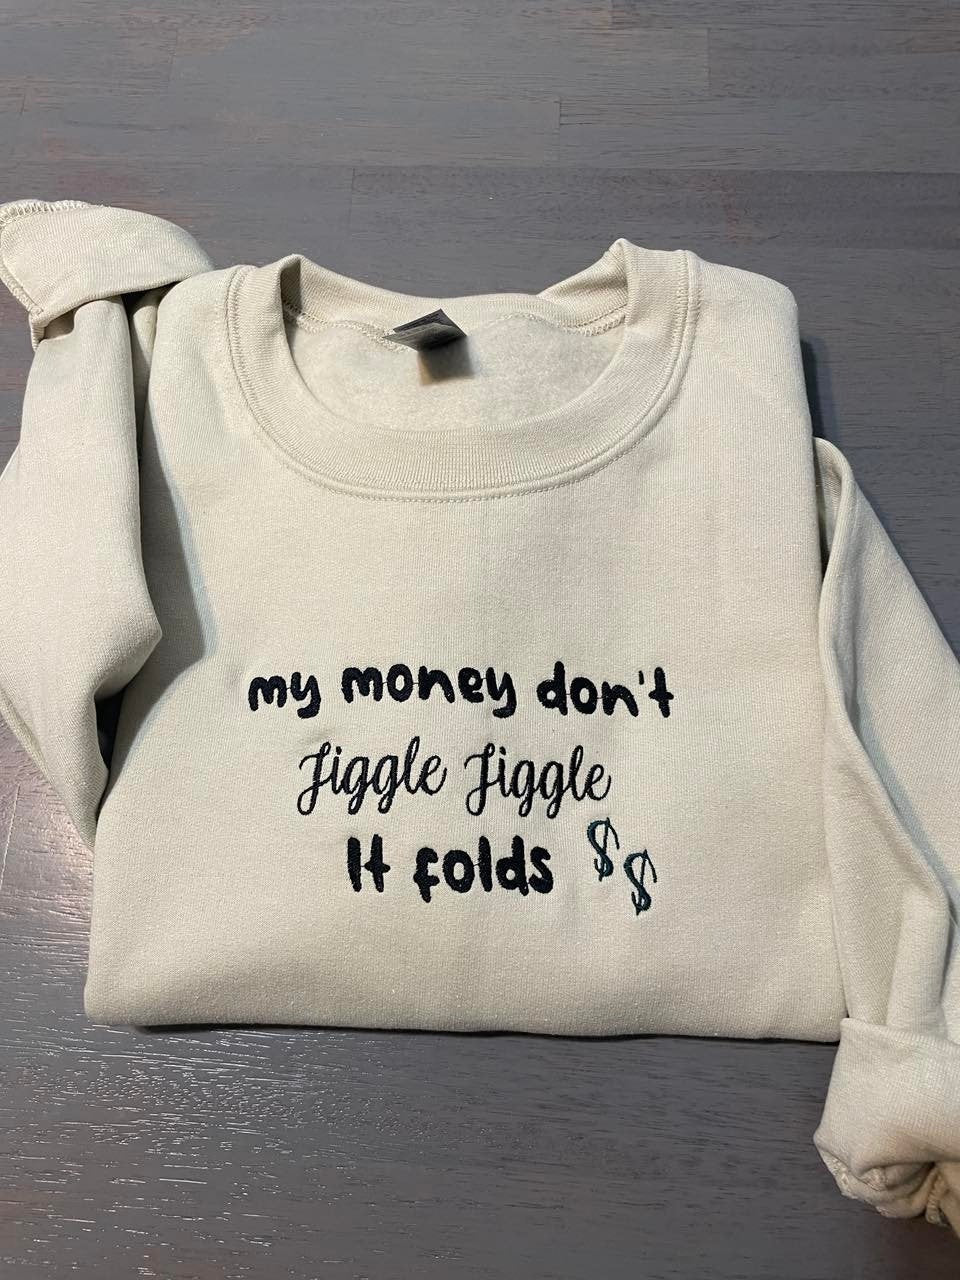 My Money don't jiggle jiggle embroidered crewneck, Don't  jiggle jiggle embroidered sweatshirt, Custom embroidered sweatshirts - MrEmbroideryGifts